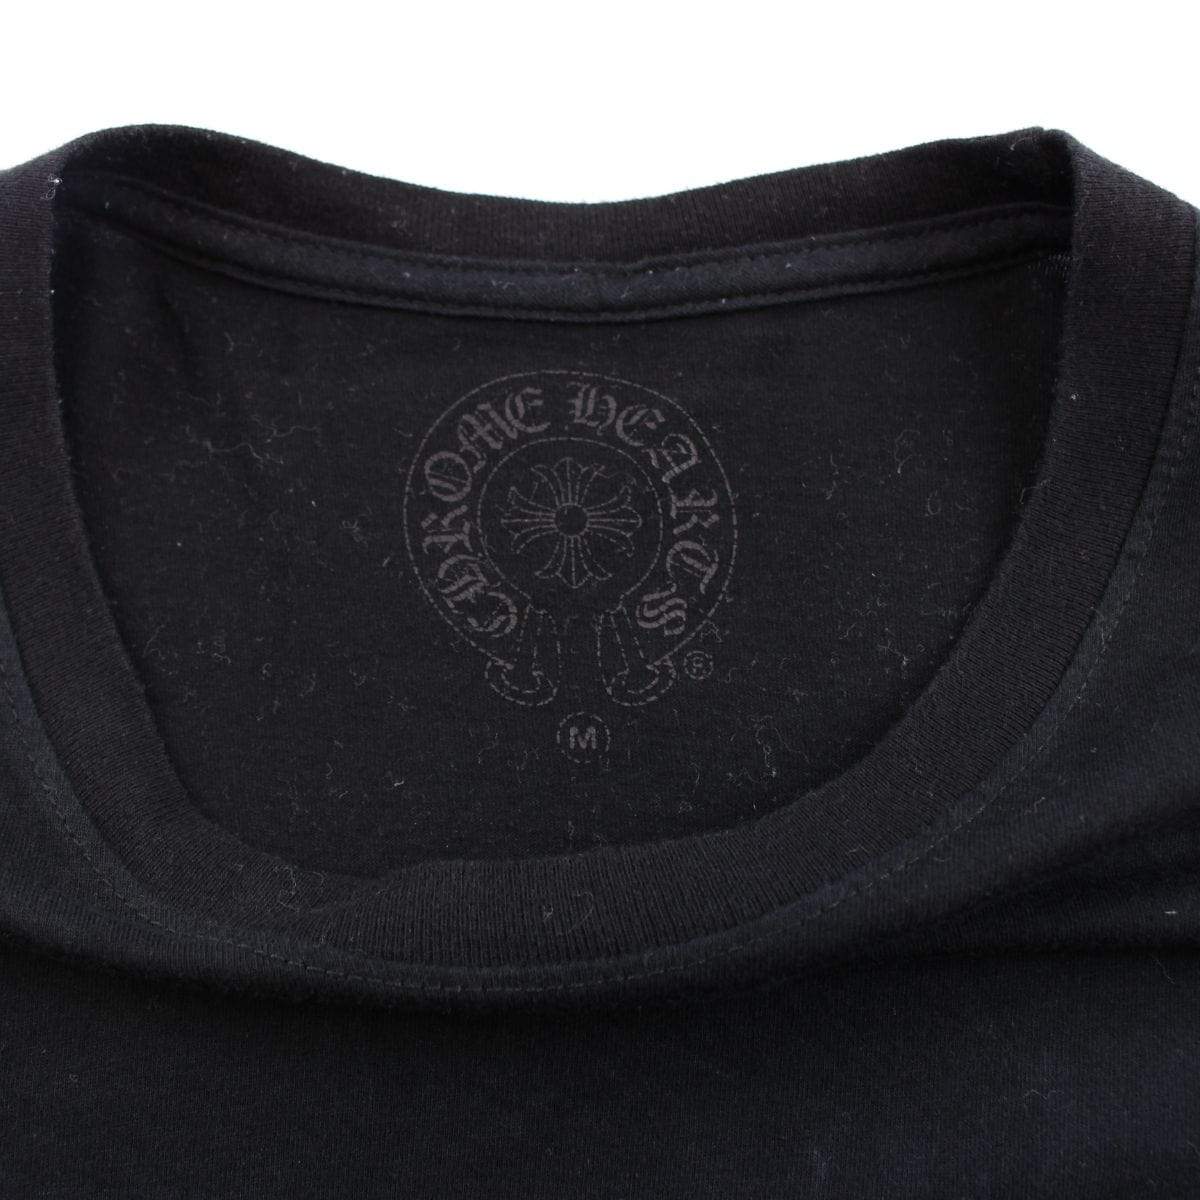 chrome hearts flame sleeves ls black - SaruGeneral